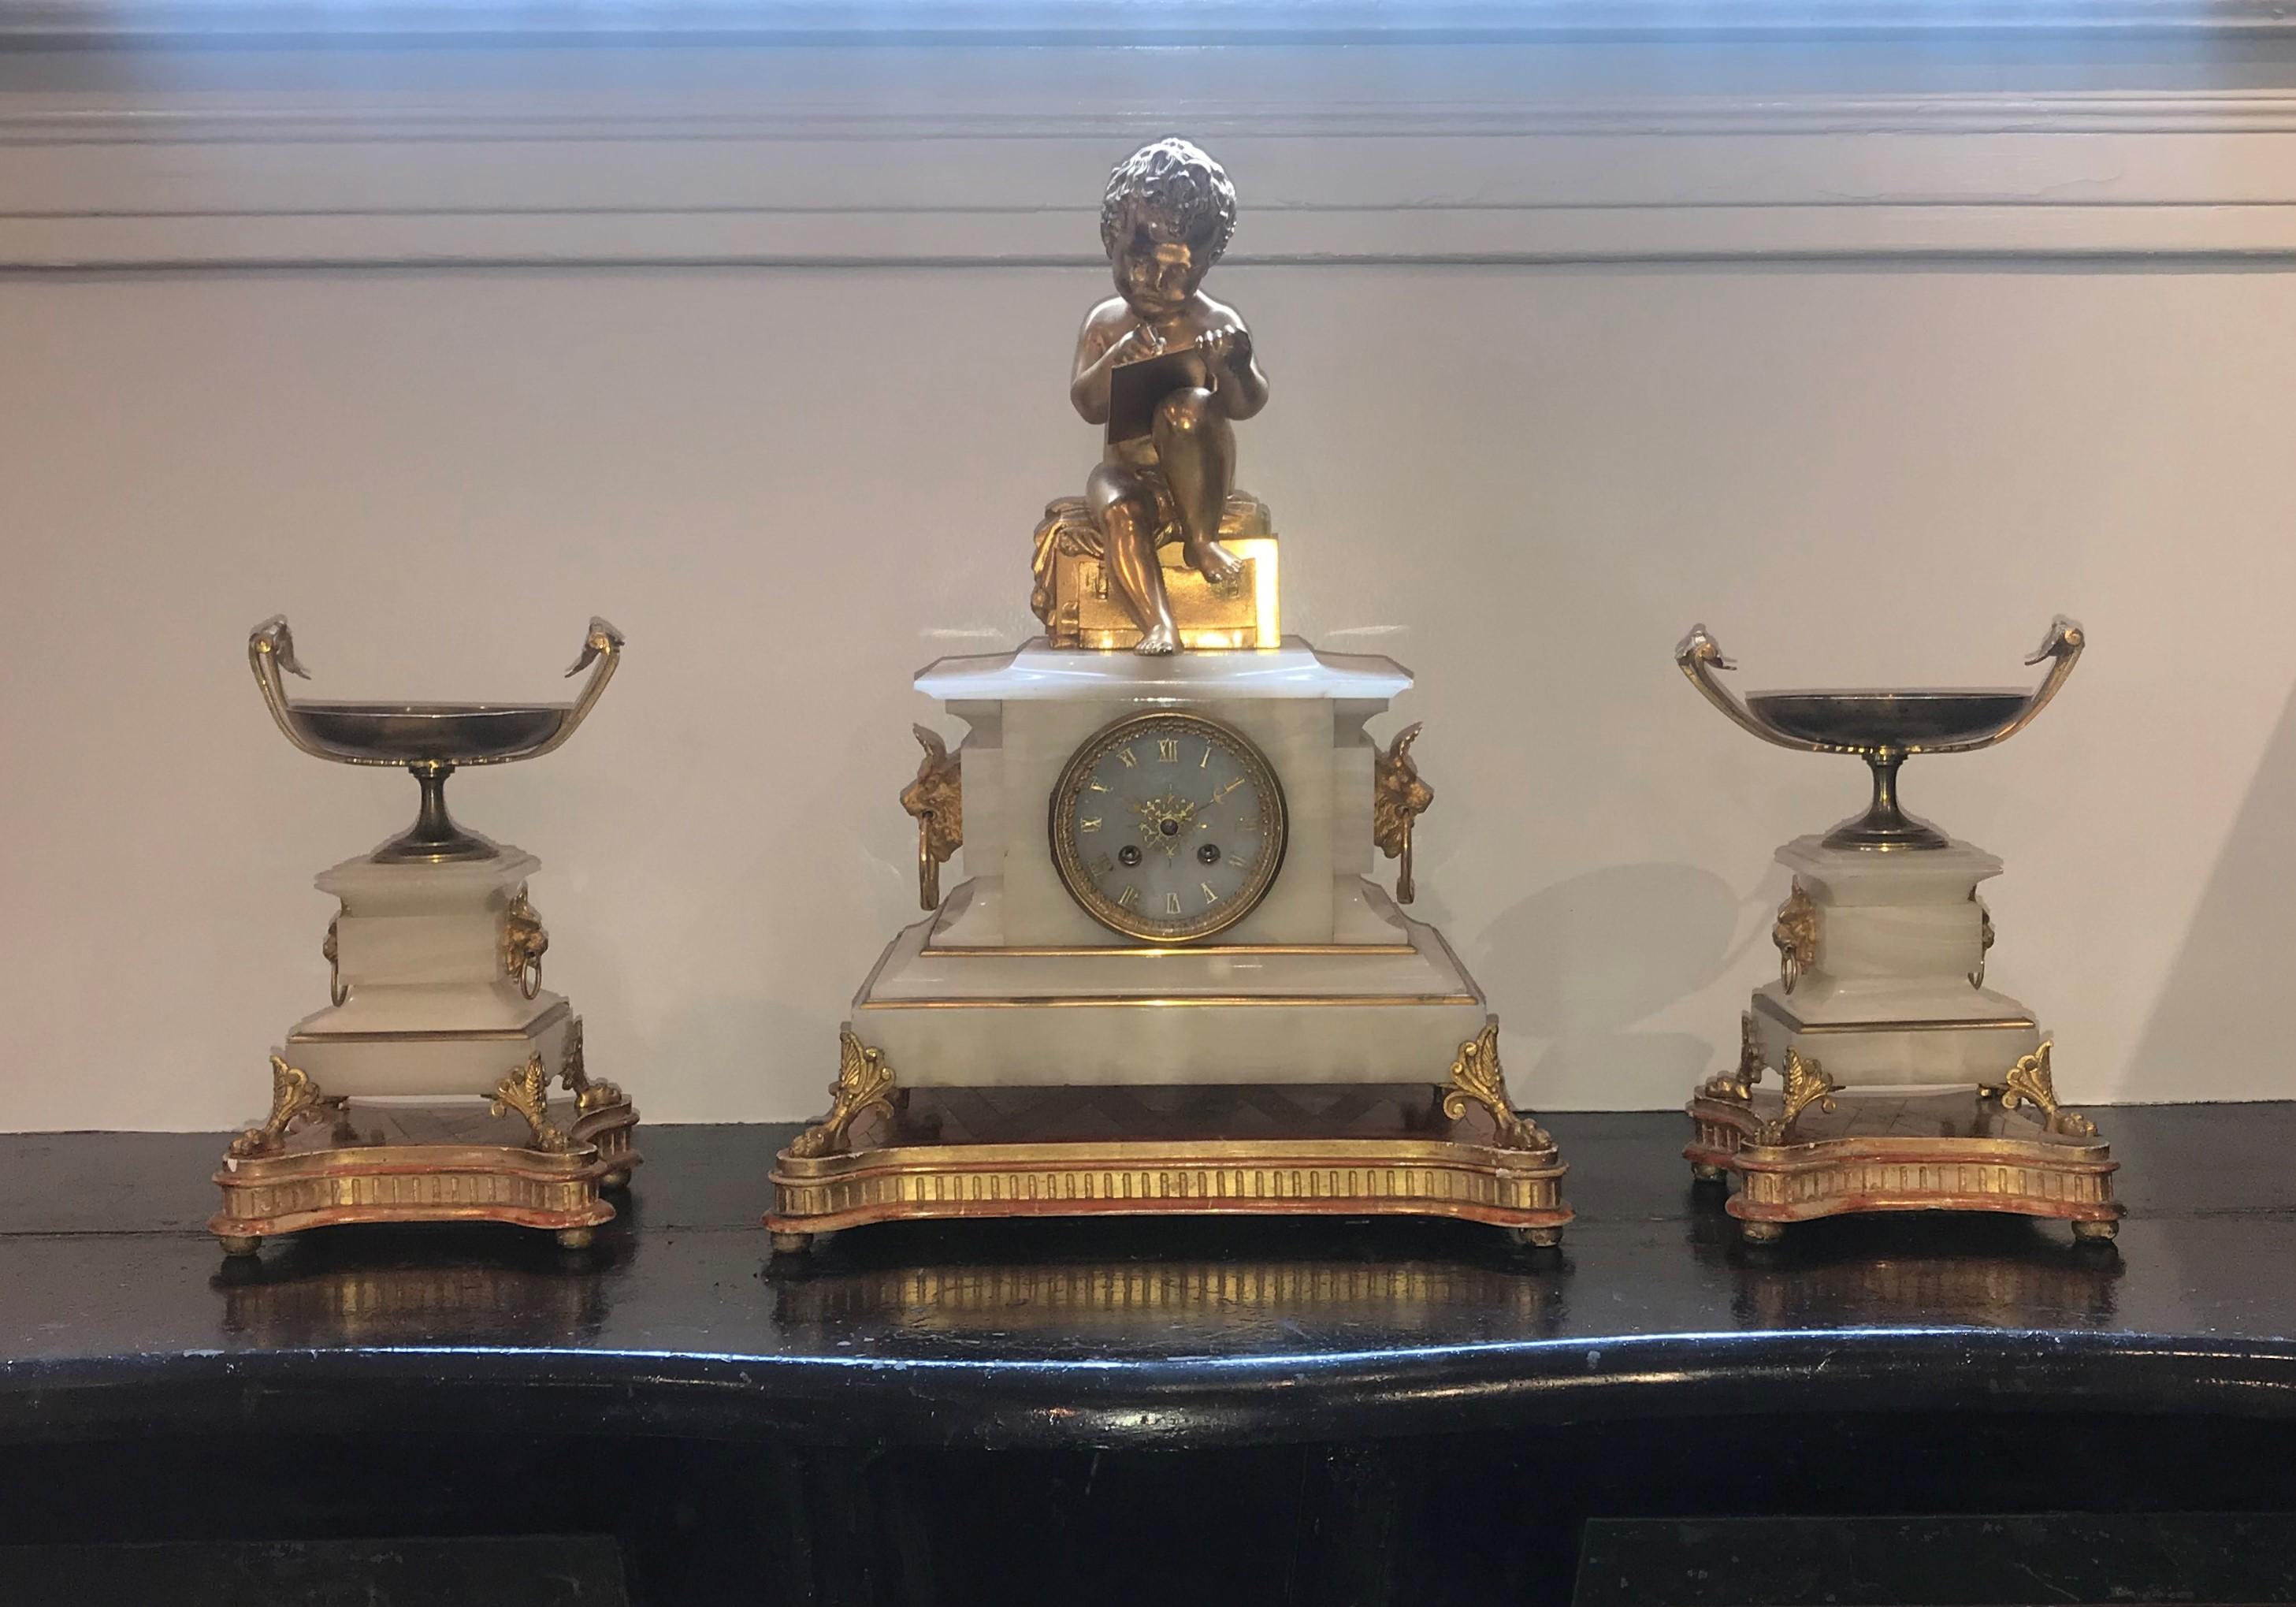 Mantel (fireplace) clock and pair of taza compotes. French white onyx and ormolu by Dasson and Godeau of Paris.

Mantel (fireplace) clock with ormolu boy writing on a tablet, bull heads with rings on either side. Perteme Marseille on dial.
18